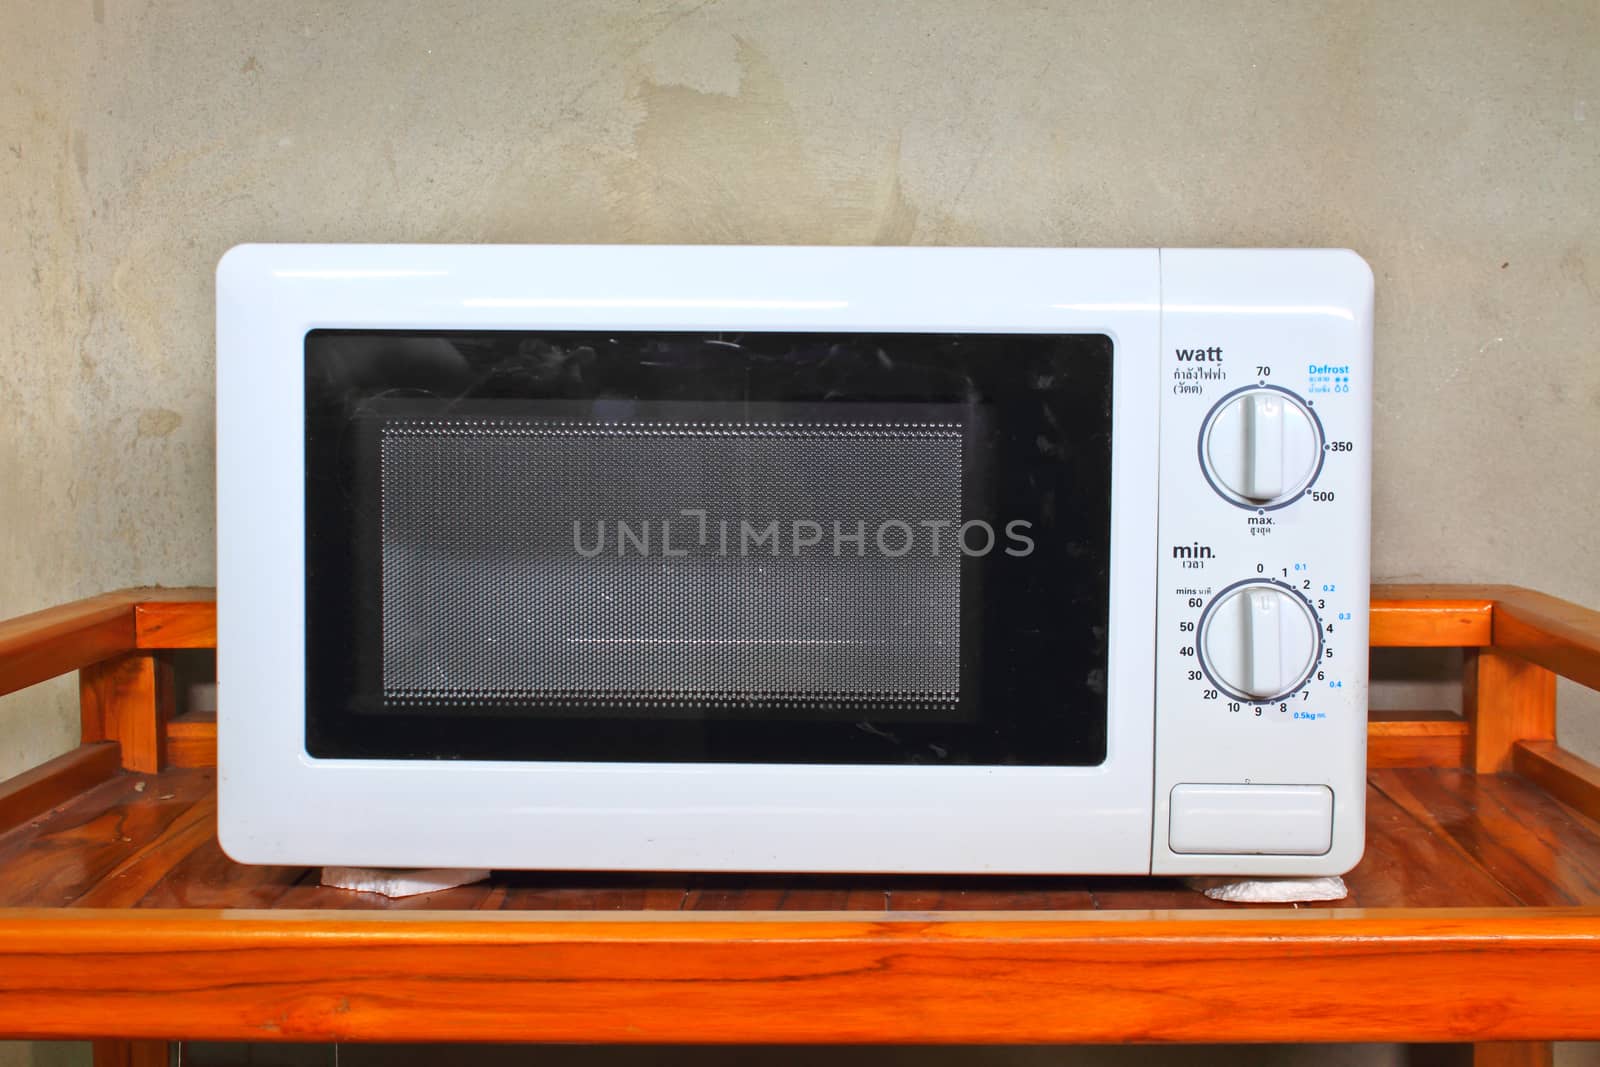 Microwave oven on the table in kitchen